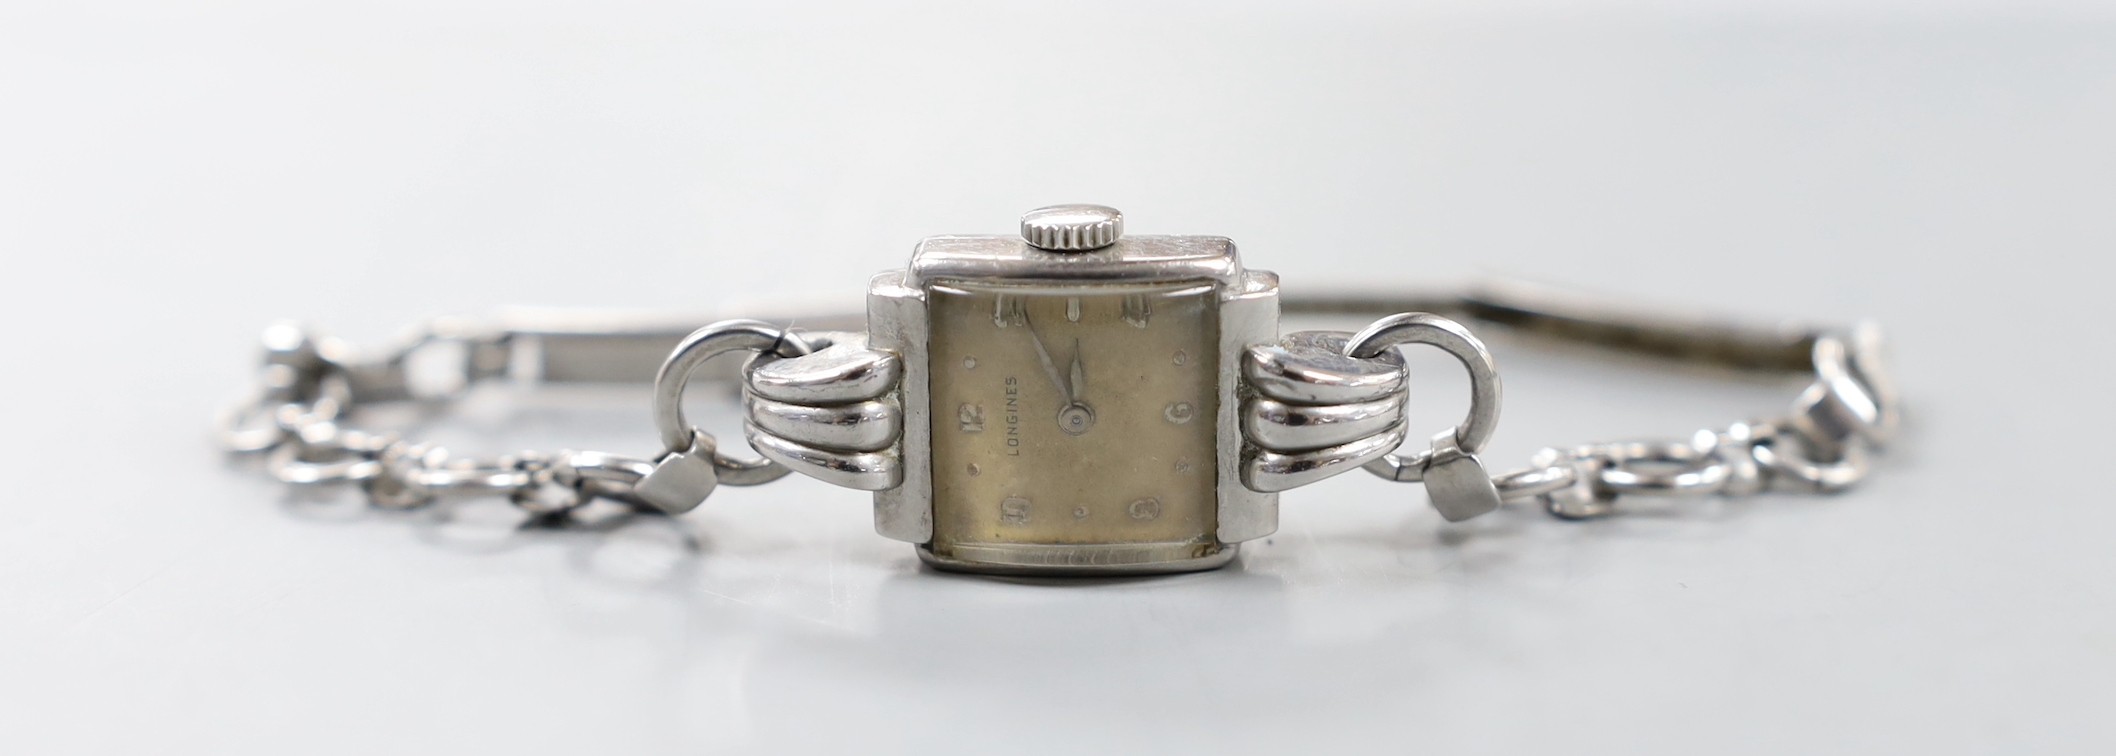 A lady's stainless steel Longines manual wind wrist watch, with fluted lugs, on associated steel chain link bracelet.